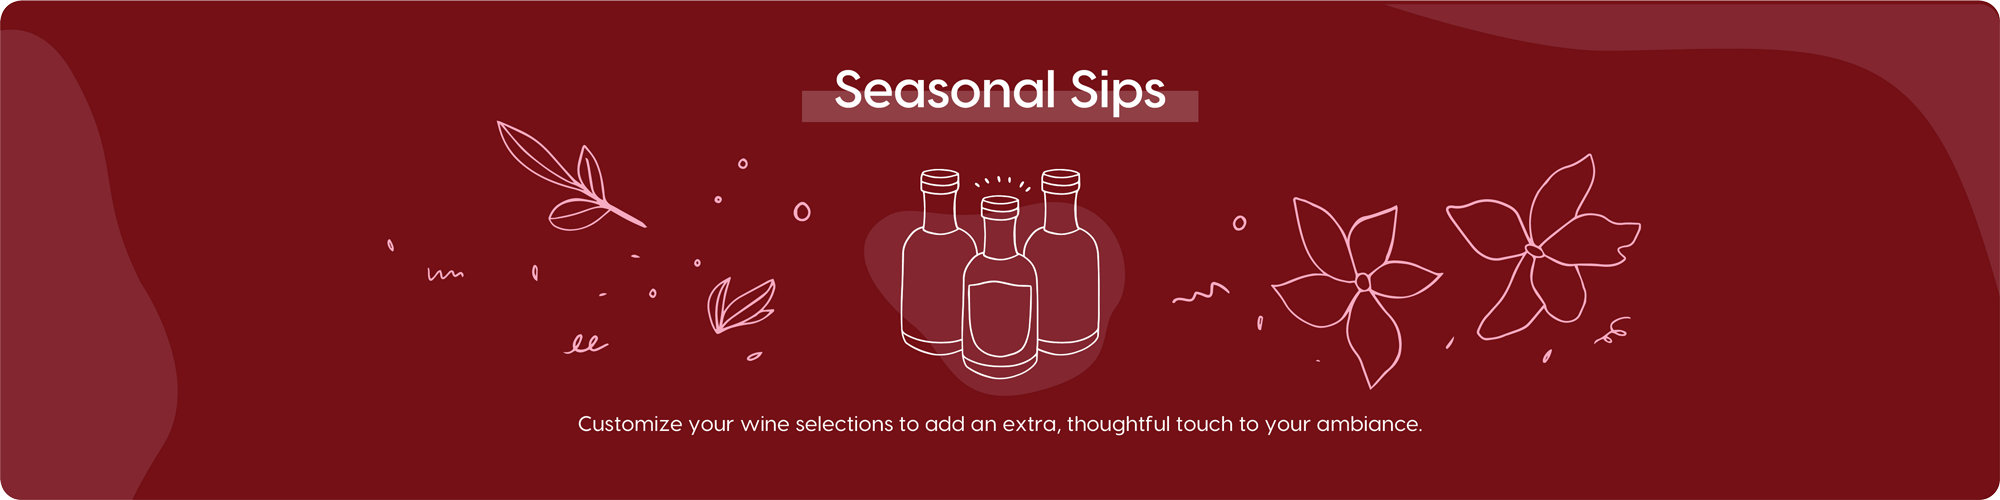 Seasonal Wines for a thoughtful touch